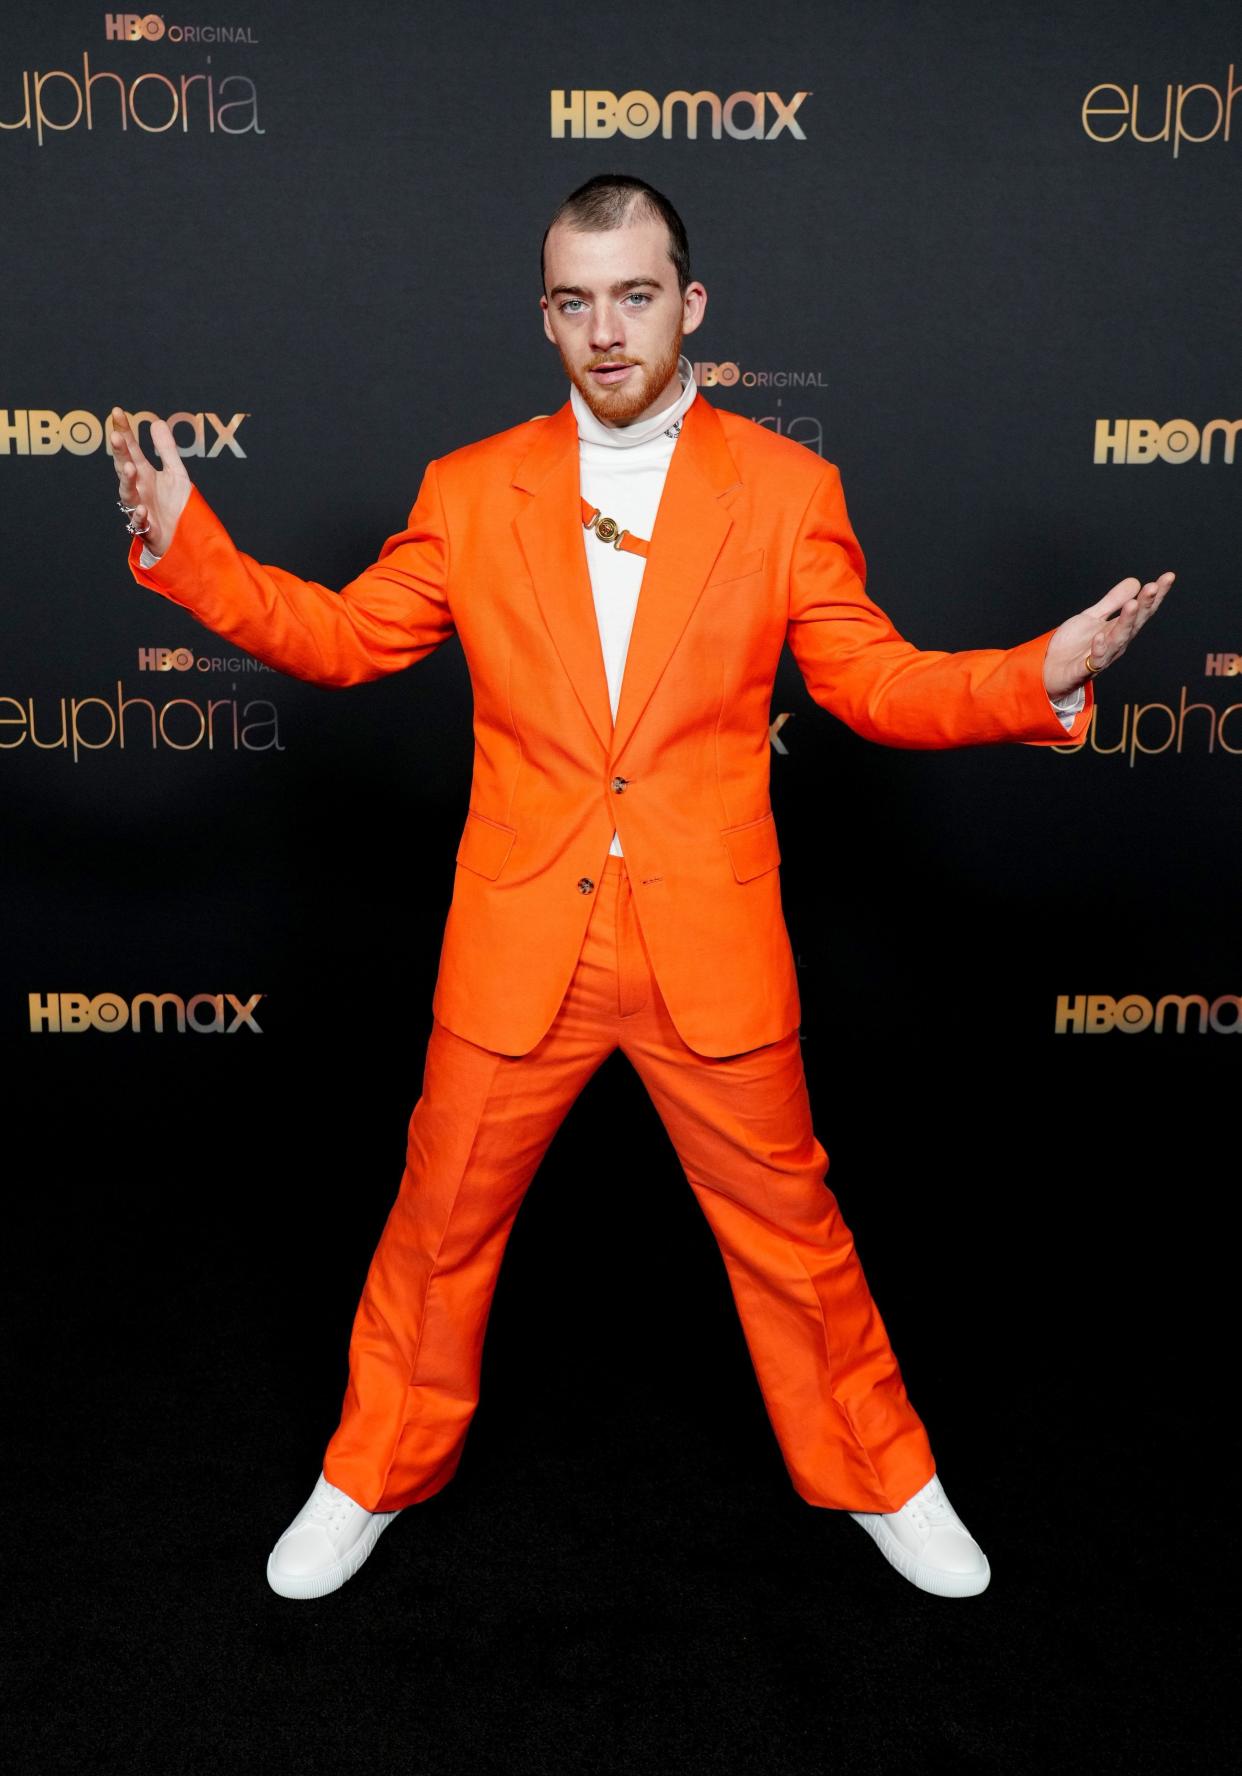 Angus in a bright orange suit with a white turtle neck, orange harness across his chest, and white sneakers.